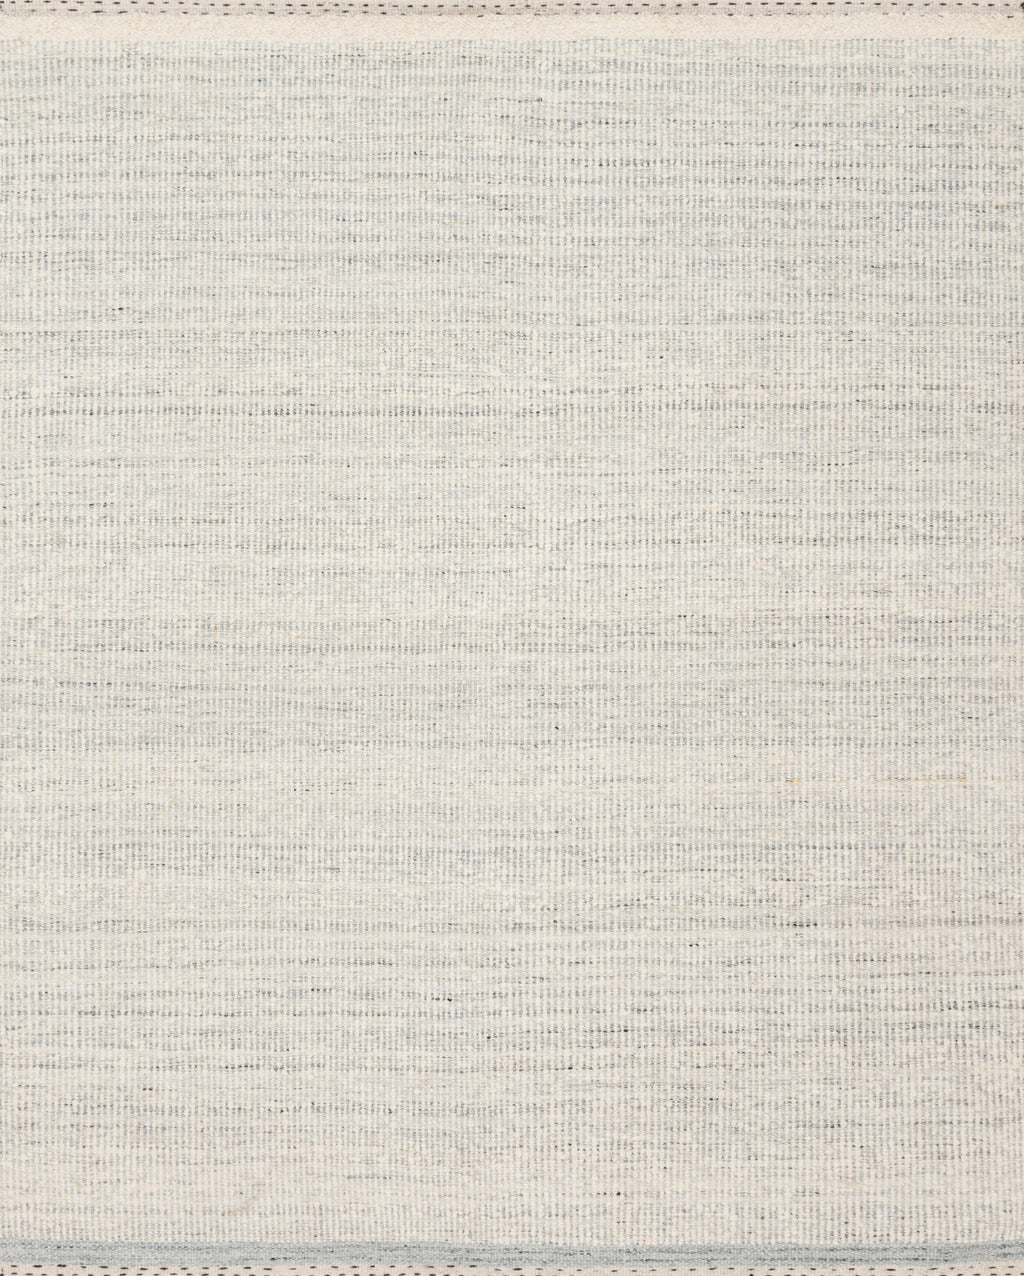 SLOANE Collection Rug  in  MIST Beige Small Hand-Woven Viscose/Acrylic